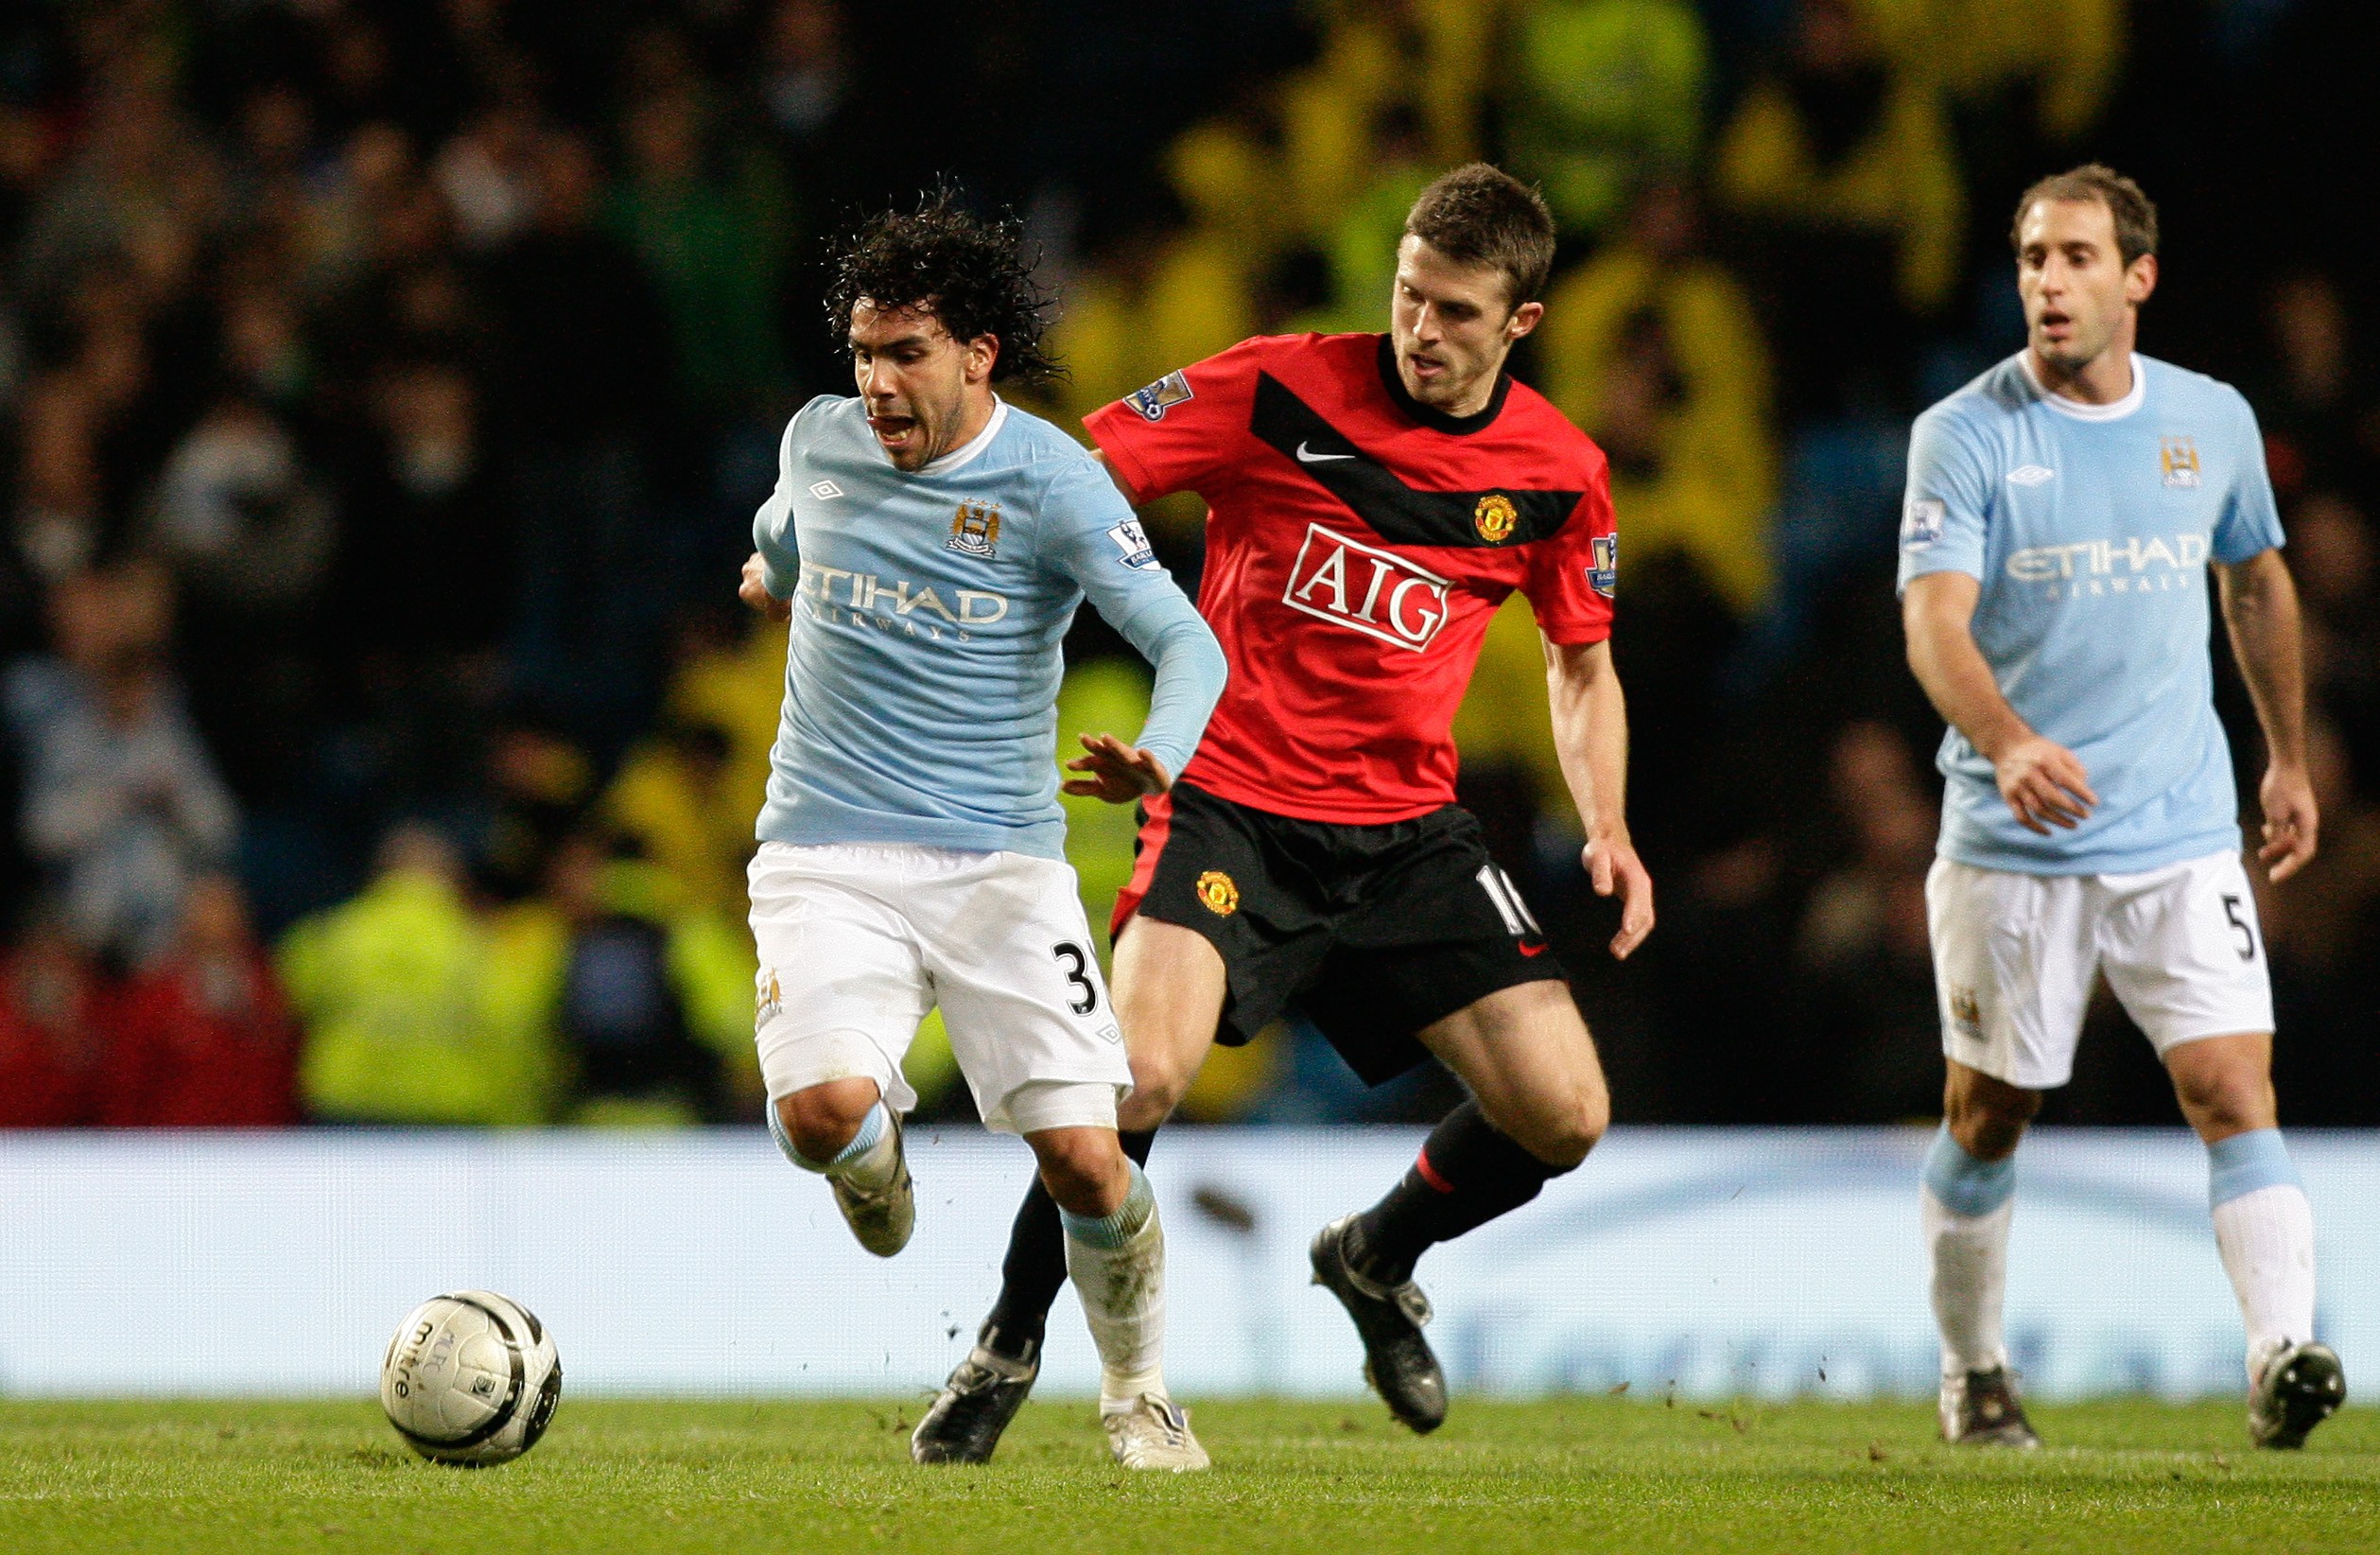 Carling Cup, City, Carlos Tevez, Manchester, United